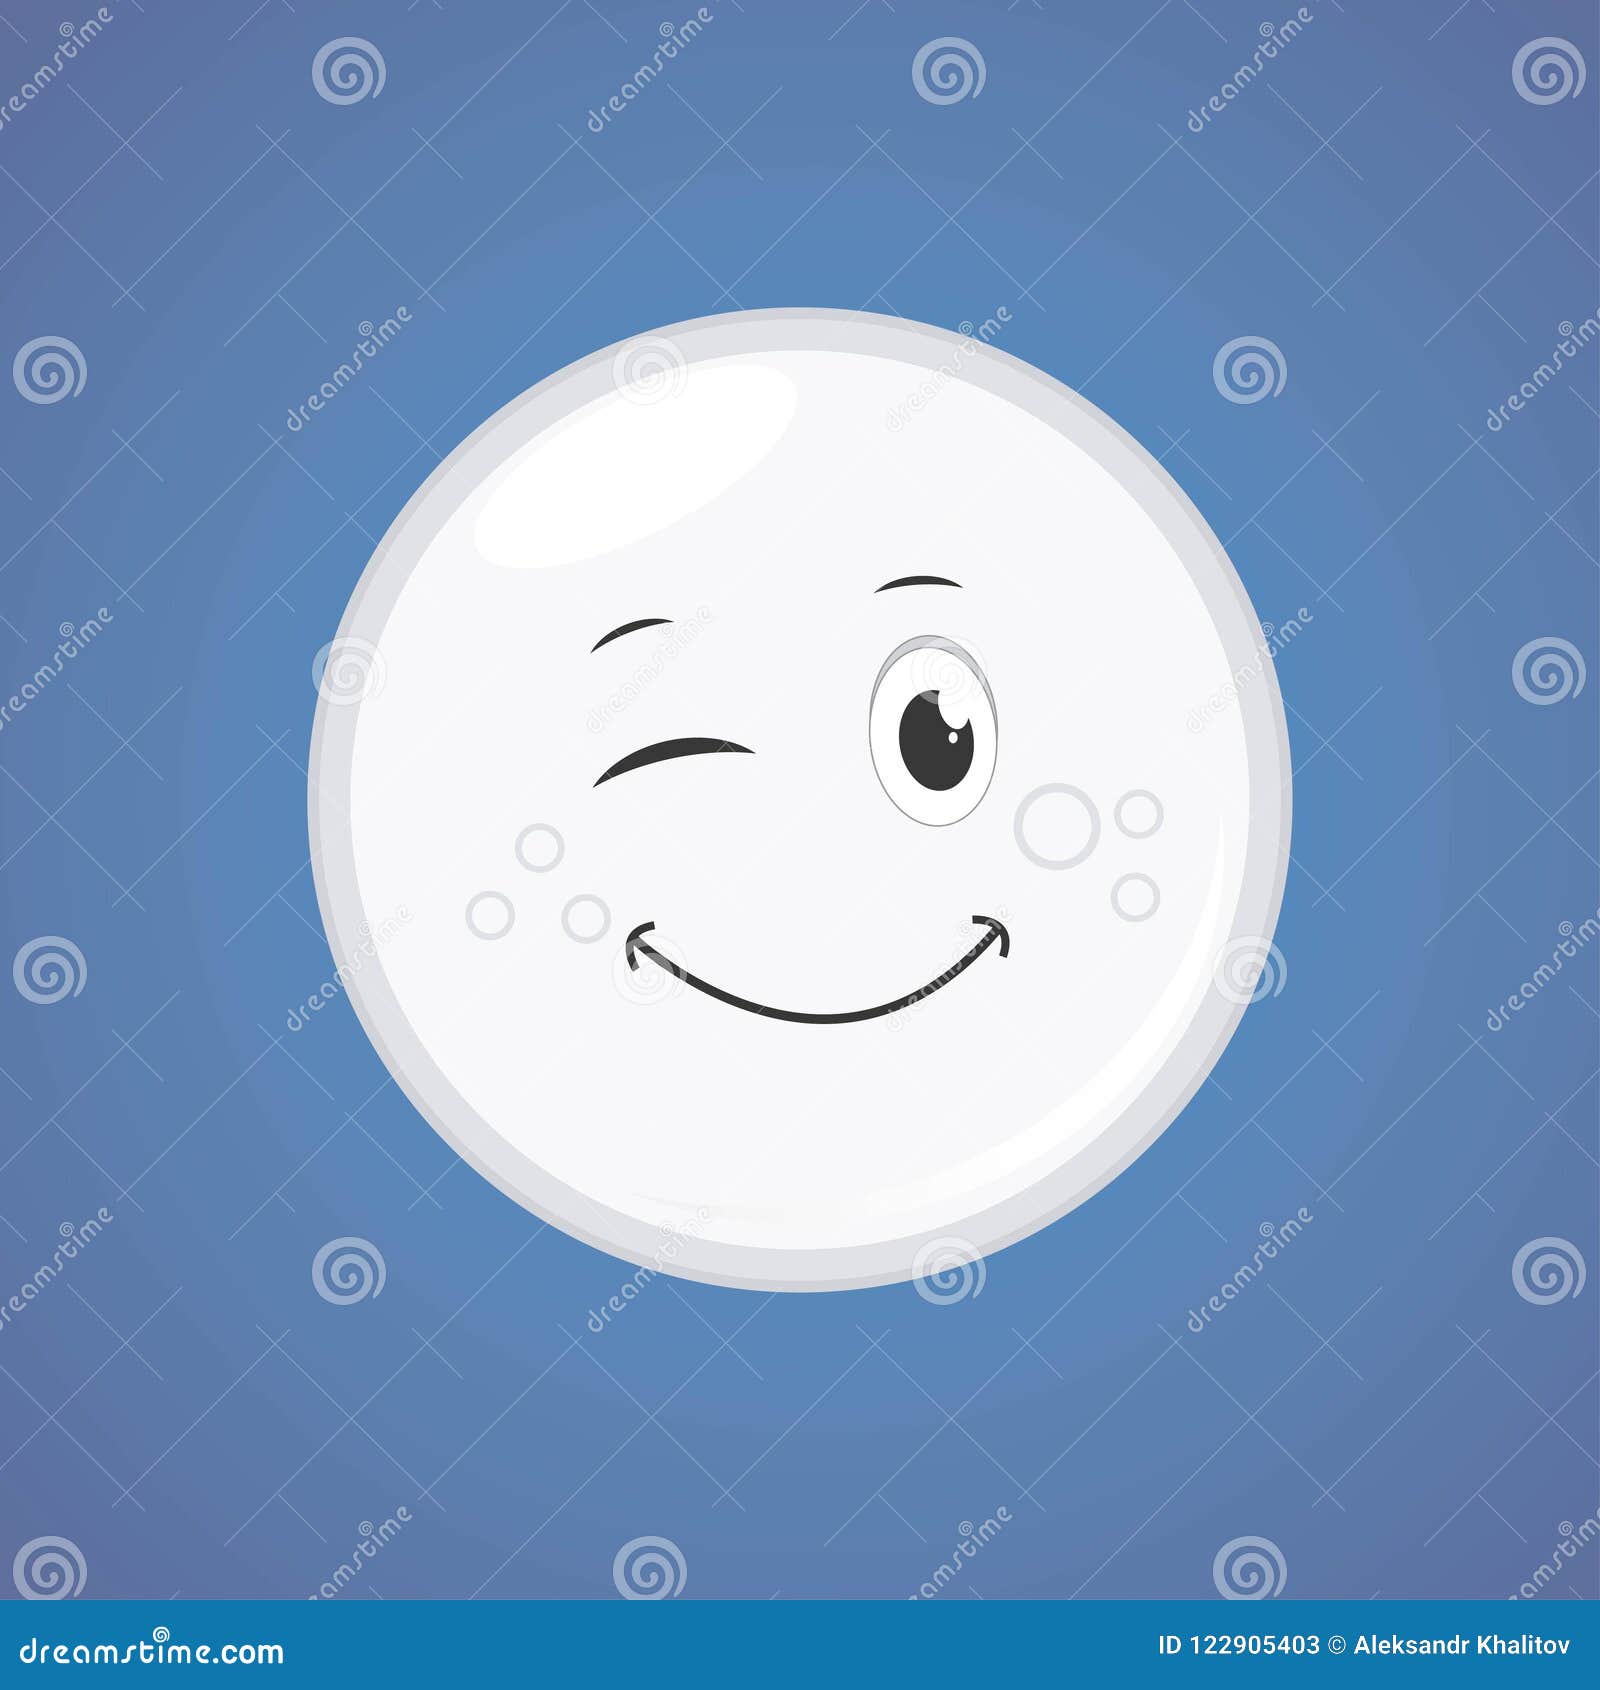 White Simple Winking Character Cartoon Moon Stock Vector - Illustration of  emotion, icon: 122905403